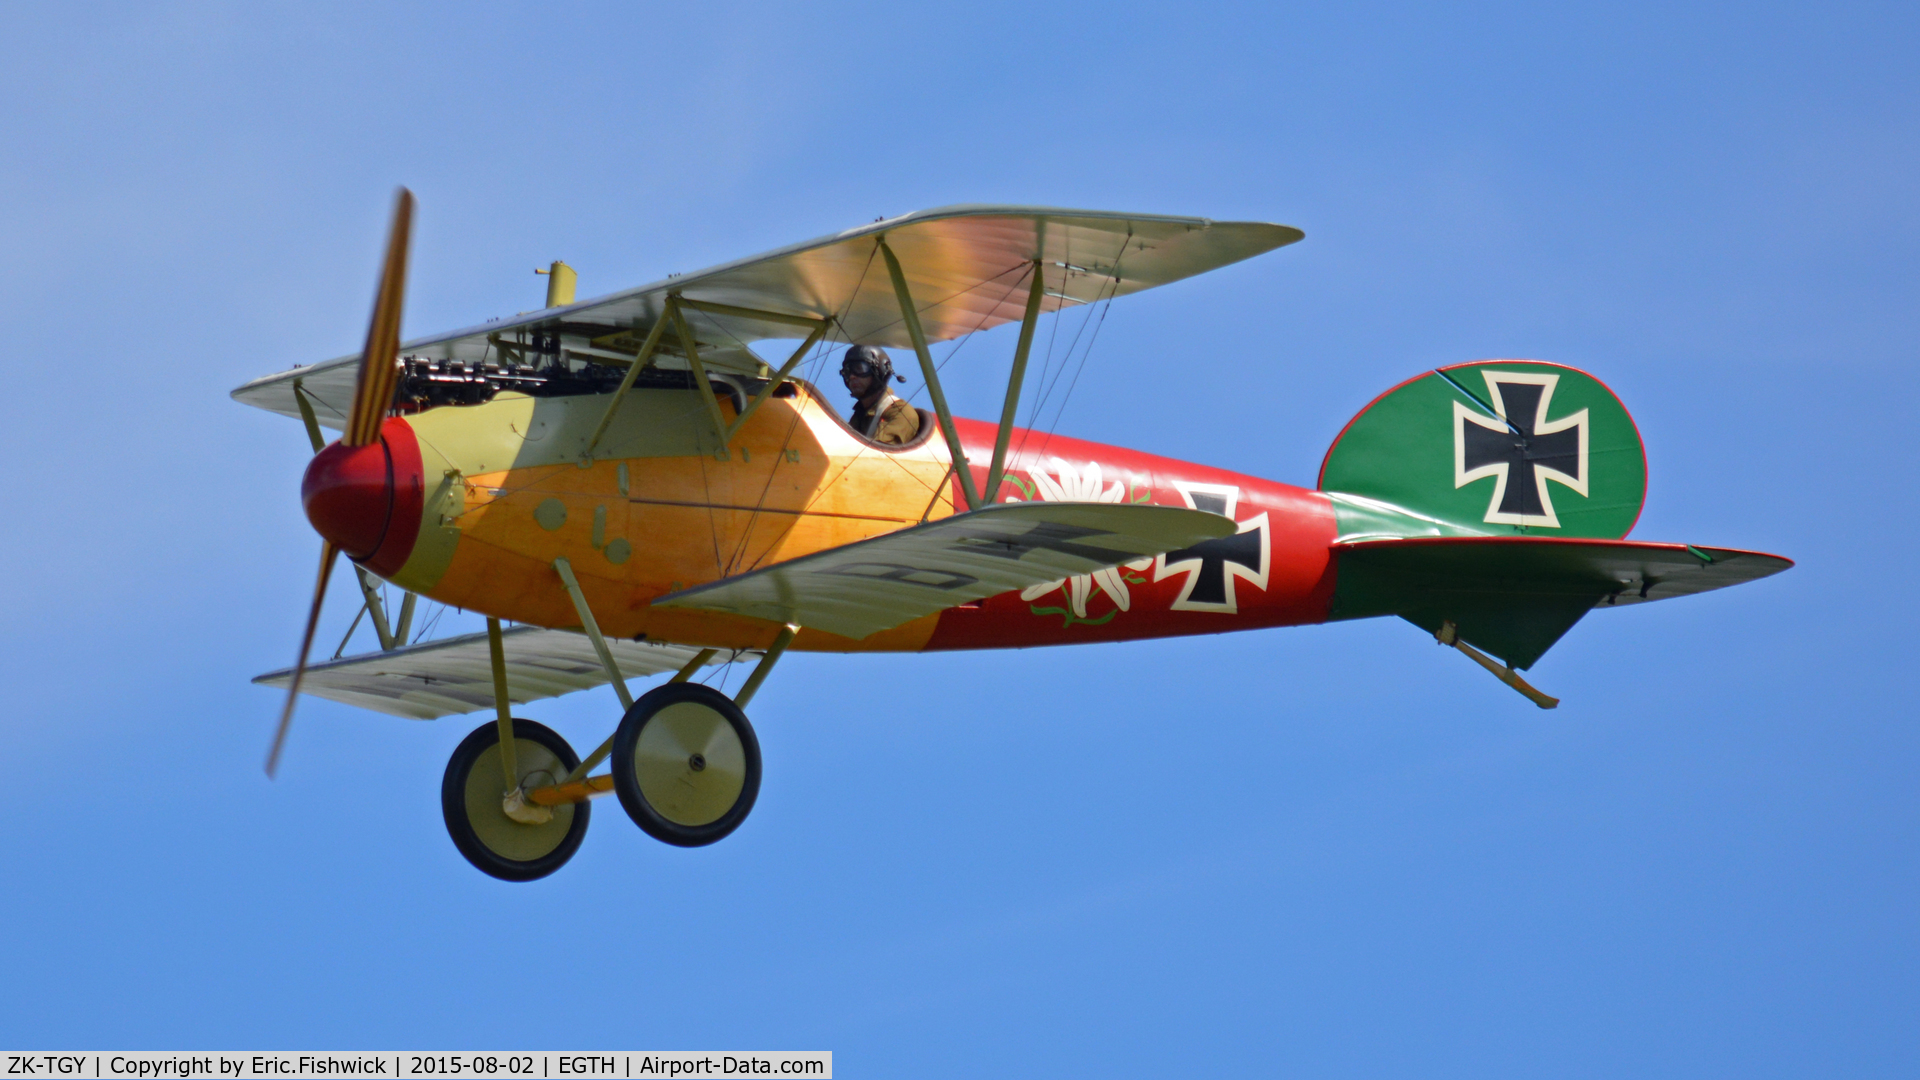 ZK-TGY, 2015 Albatros D-Va Replica C/N 5, 43. ZK-TGY in display mode at The Shuttleworth Wings and Wheels Airshow, Aug. 2015.